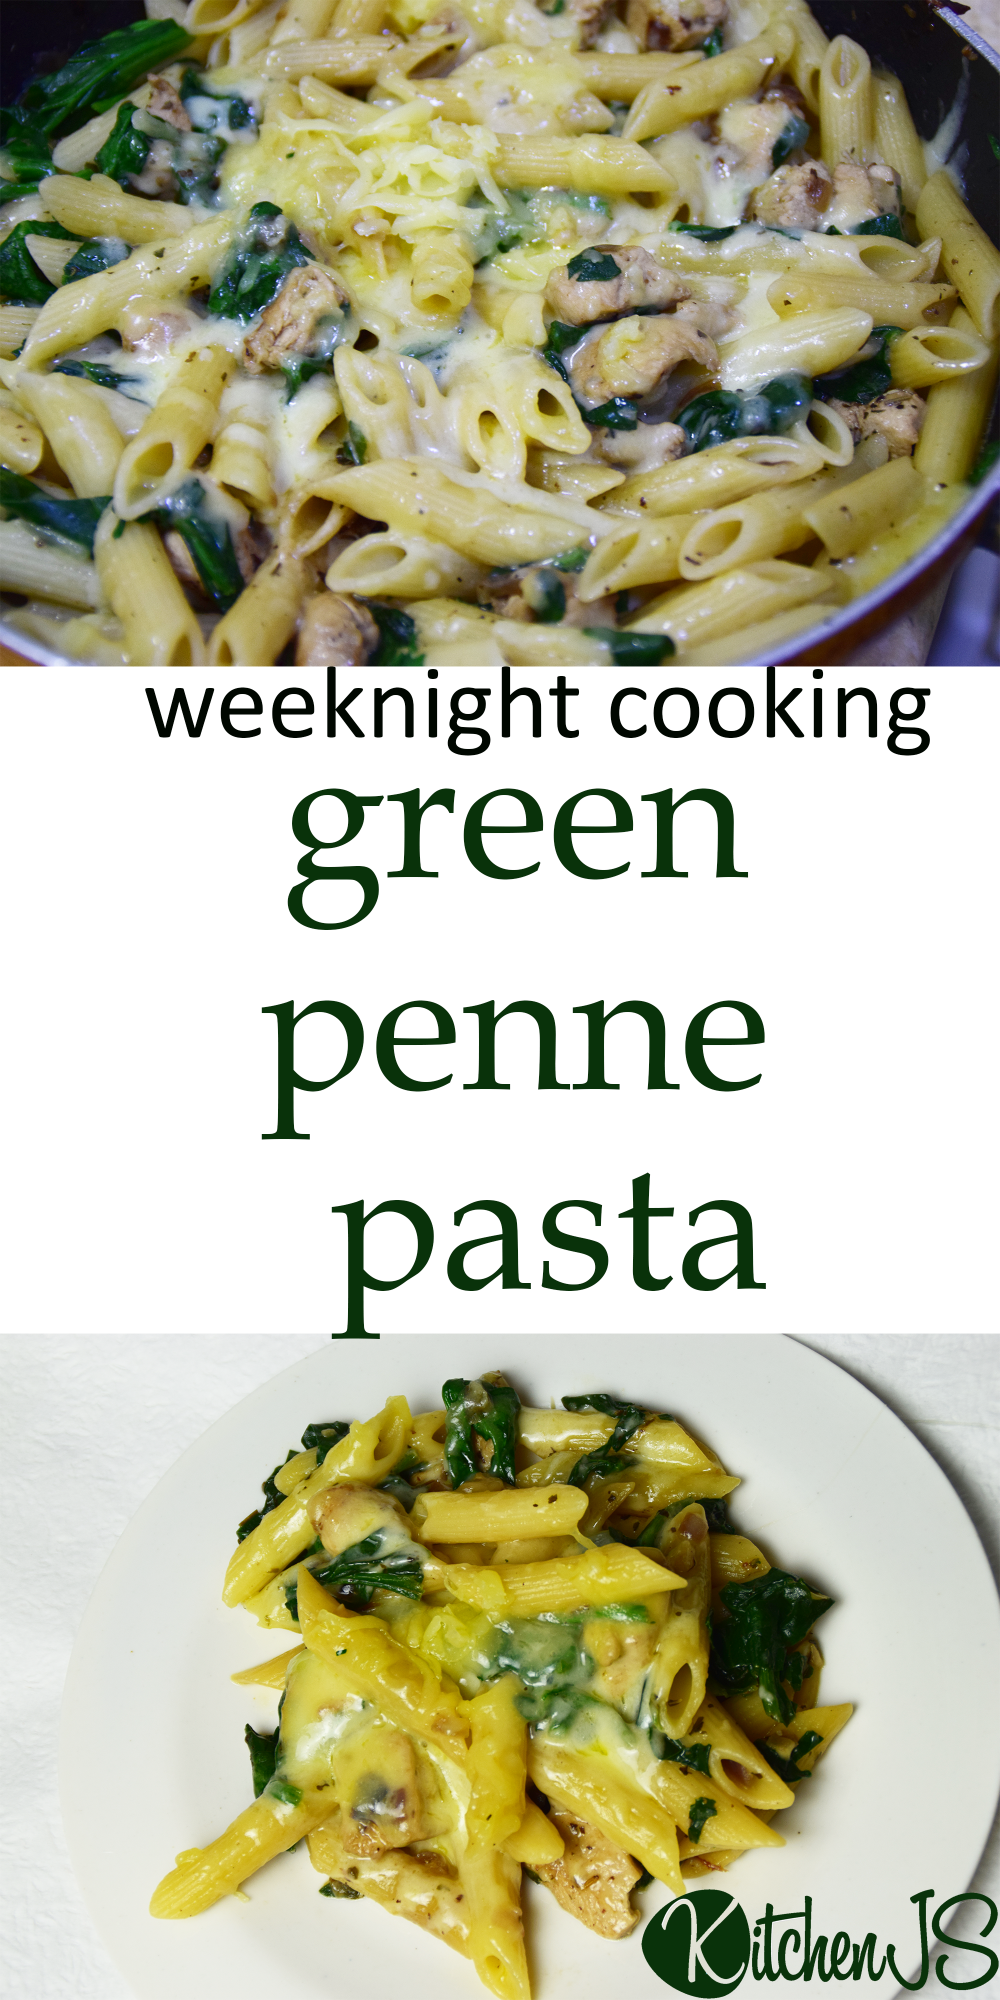 green penne pasta weekniight cooking made easy